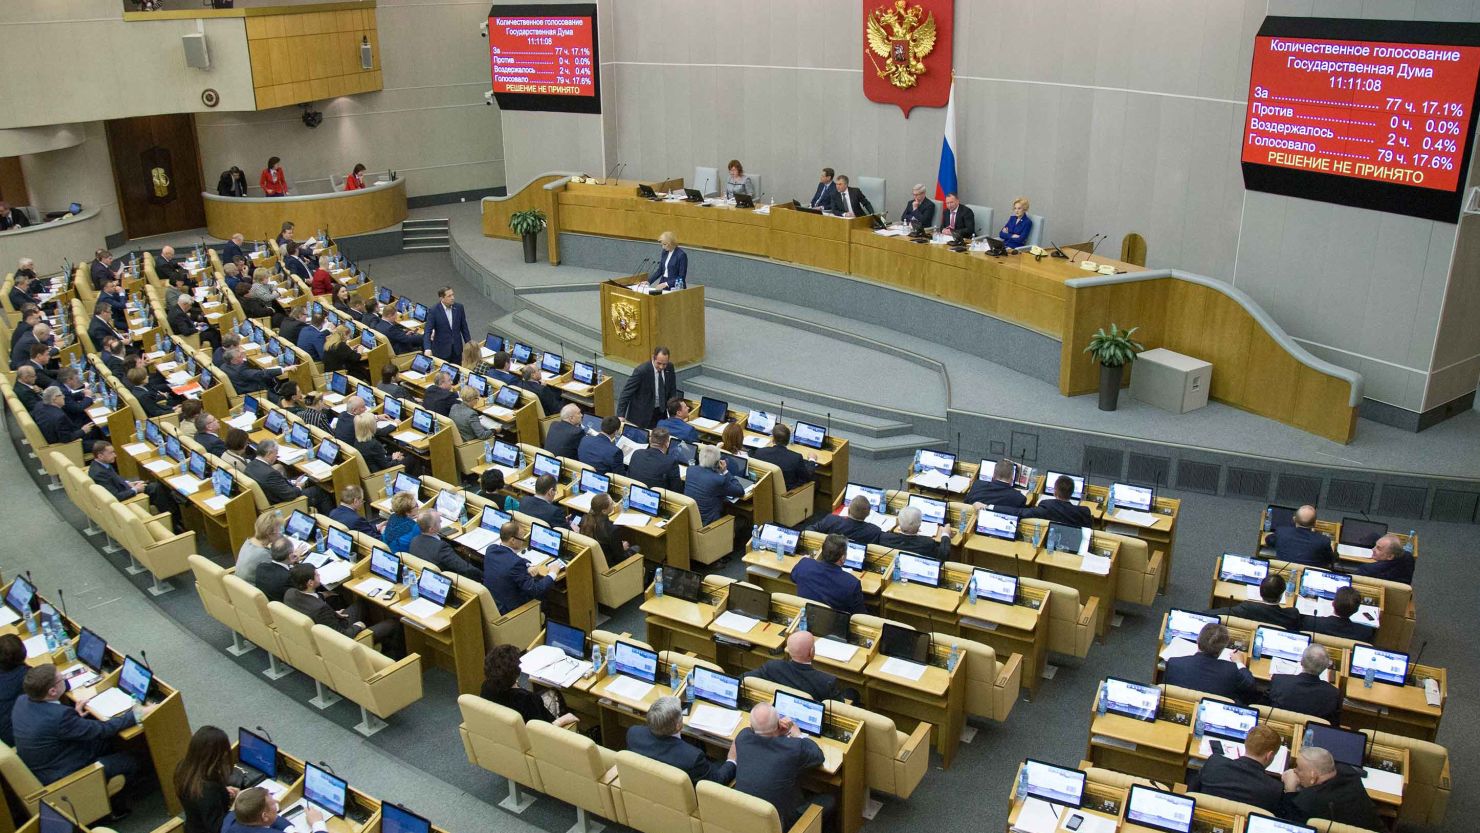 The Duma has approved the draft bill in two readings, on Wednesday voting overwhelmingly in its favor.